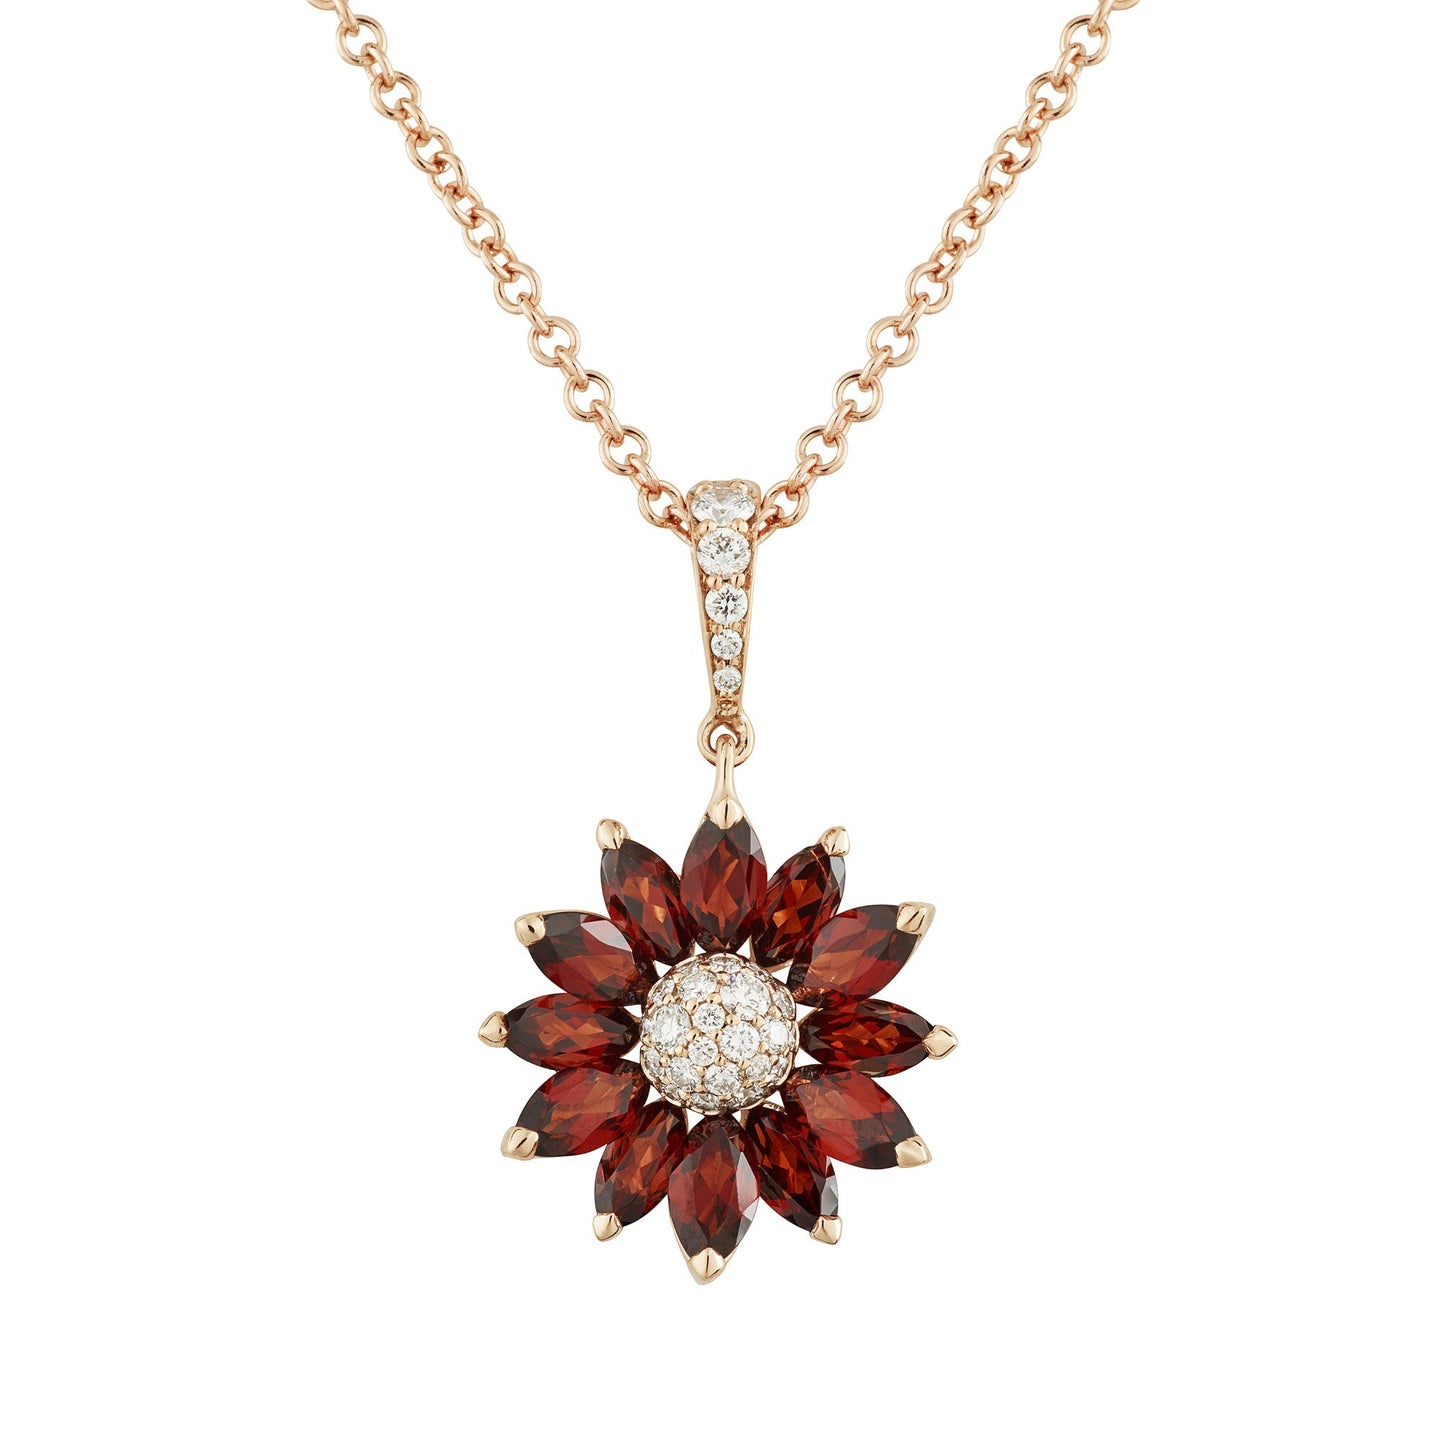 Daisy Small Pendant in 18ct Rose Gold with Garnet and Diamonds